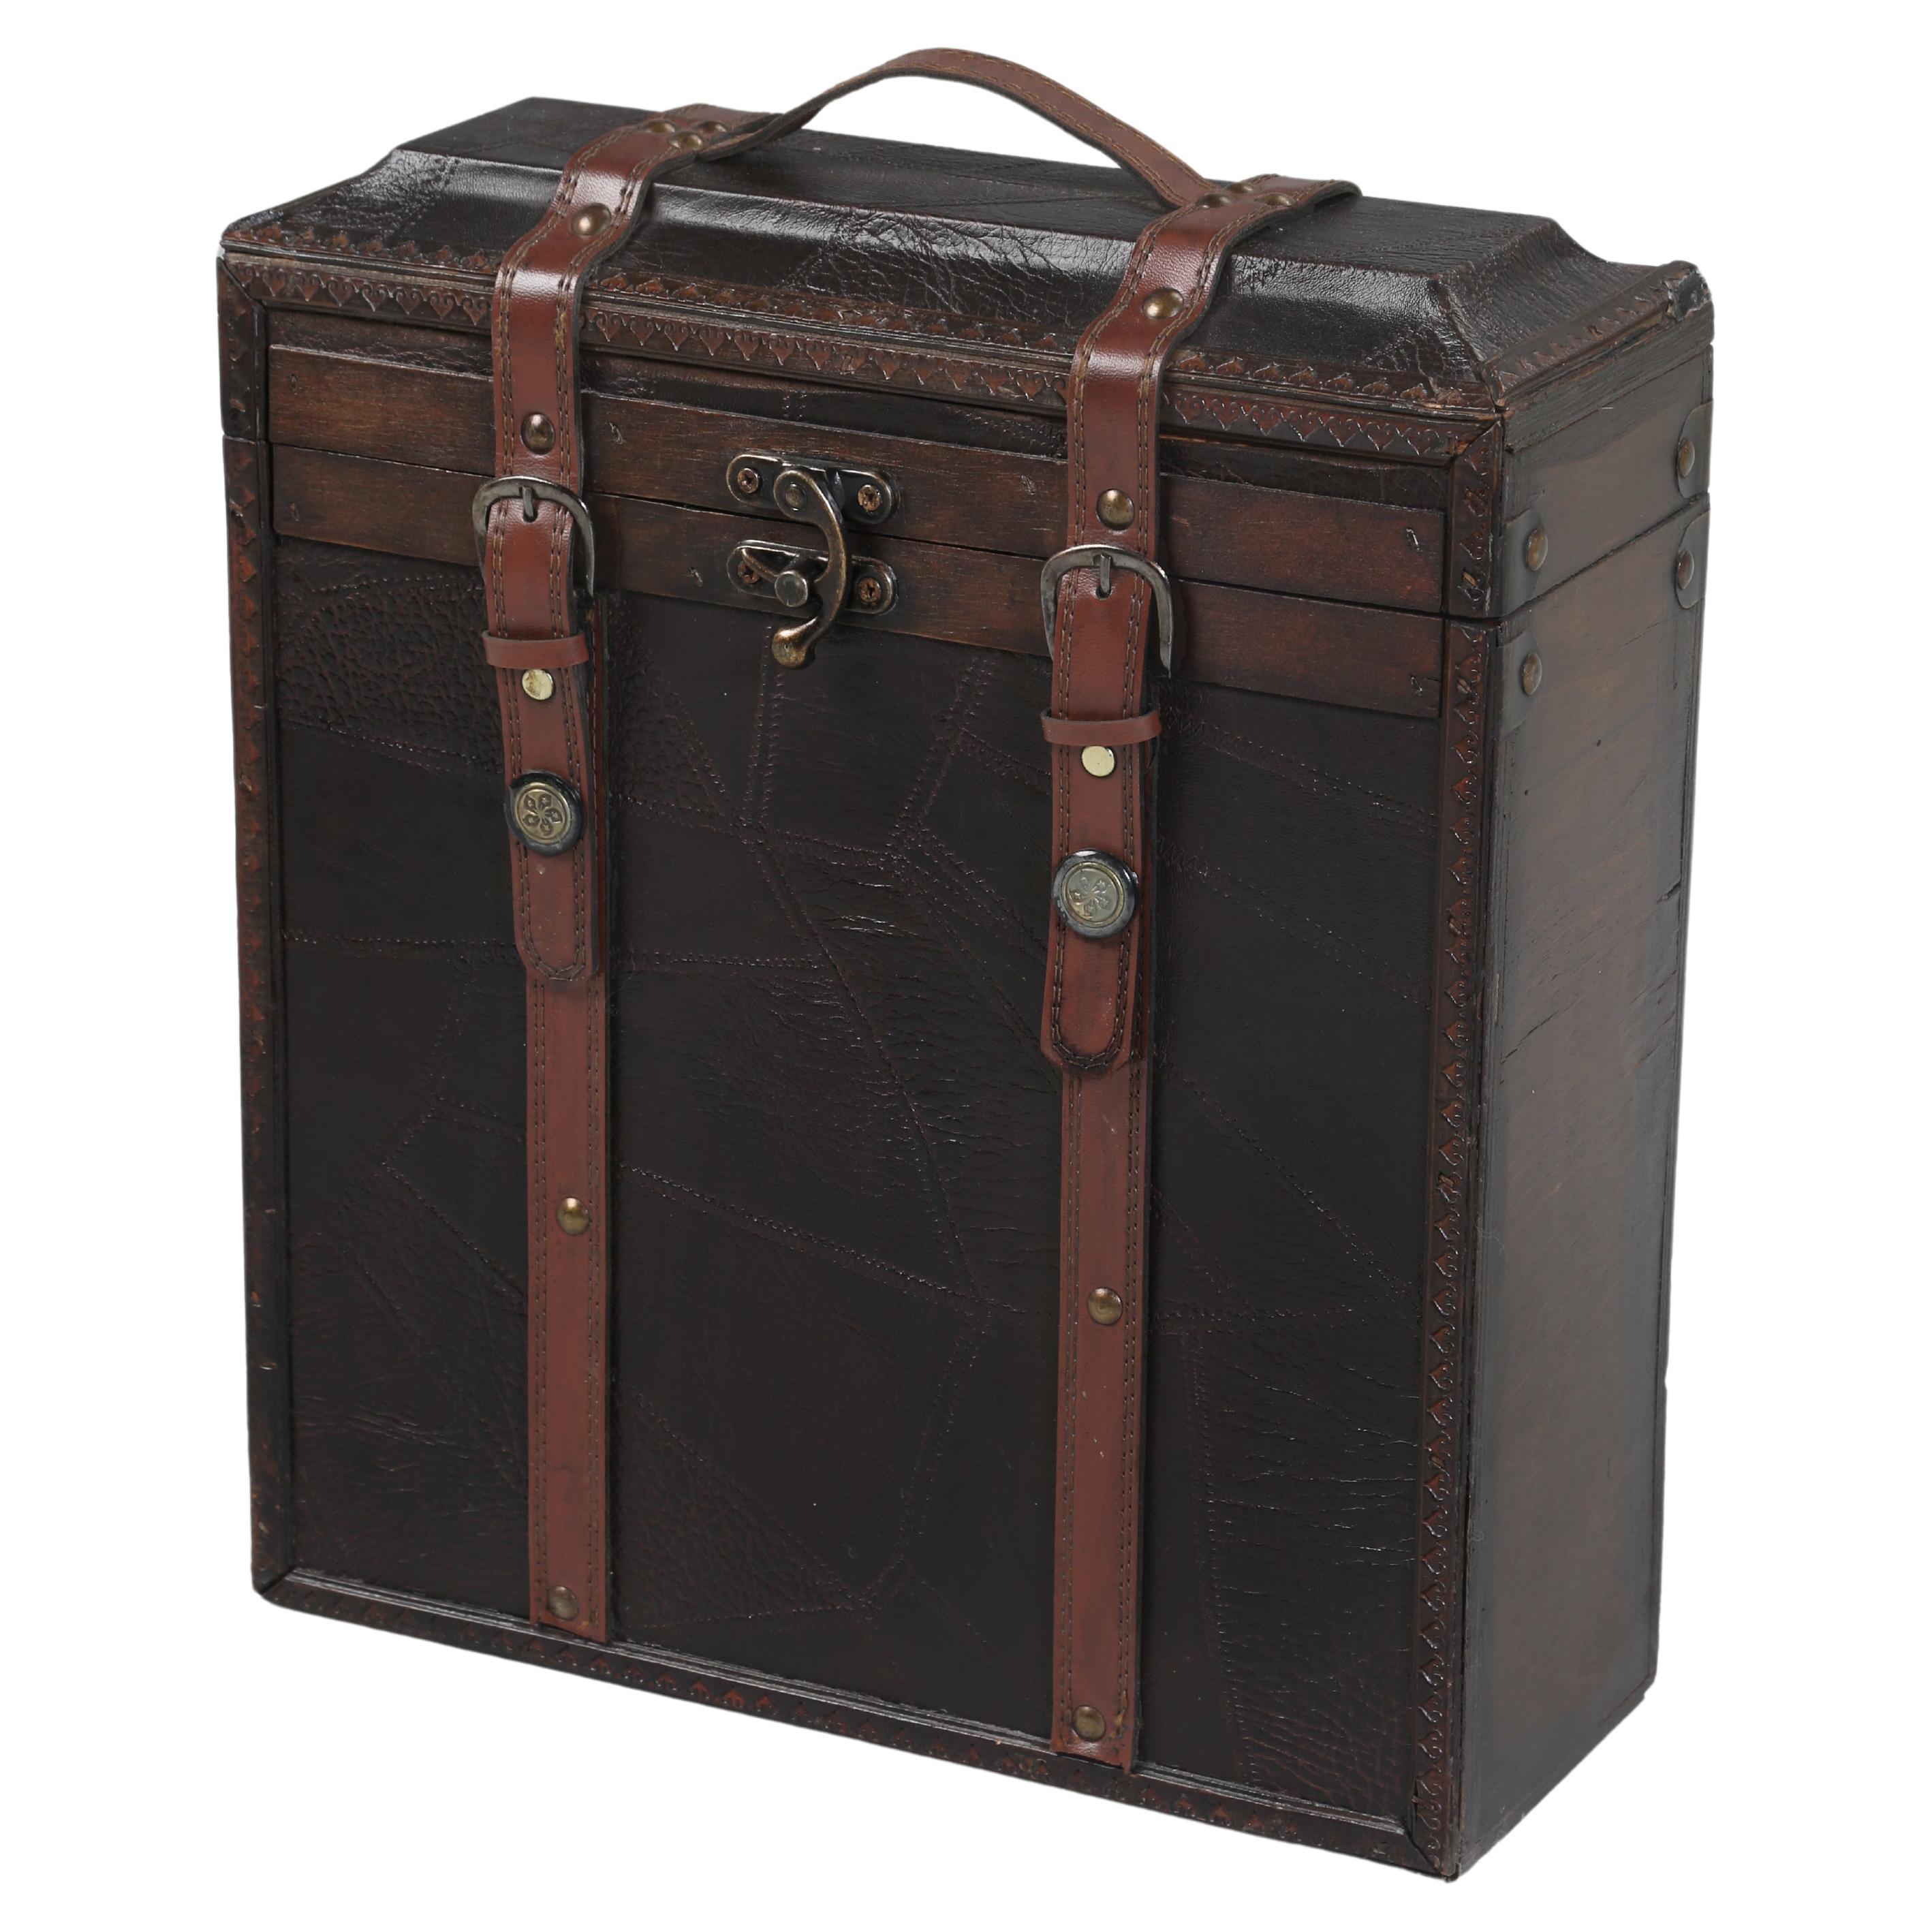 Vintage French 3-Bottle Wine Carrier with a bit of class. has to be one the best looking Wine Bottle Carriers I have ever seen and reminds me more of very high-end luggage. The Vintage Wine Carrier is made of wood with a beautiful leather covering